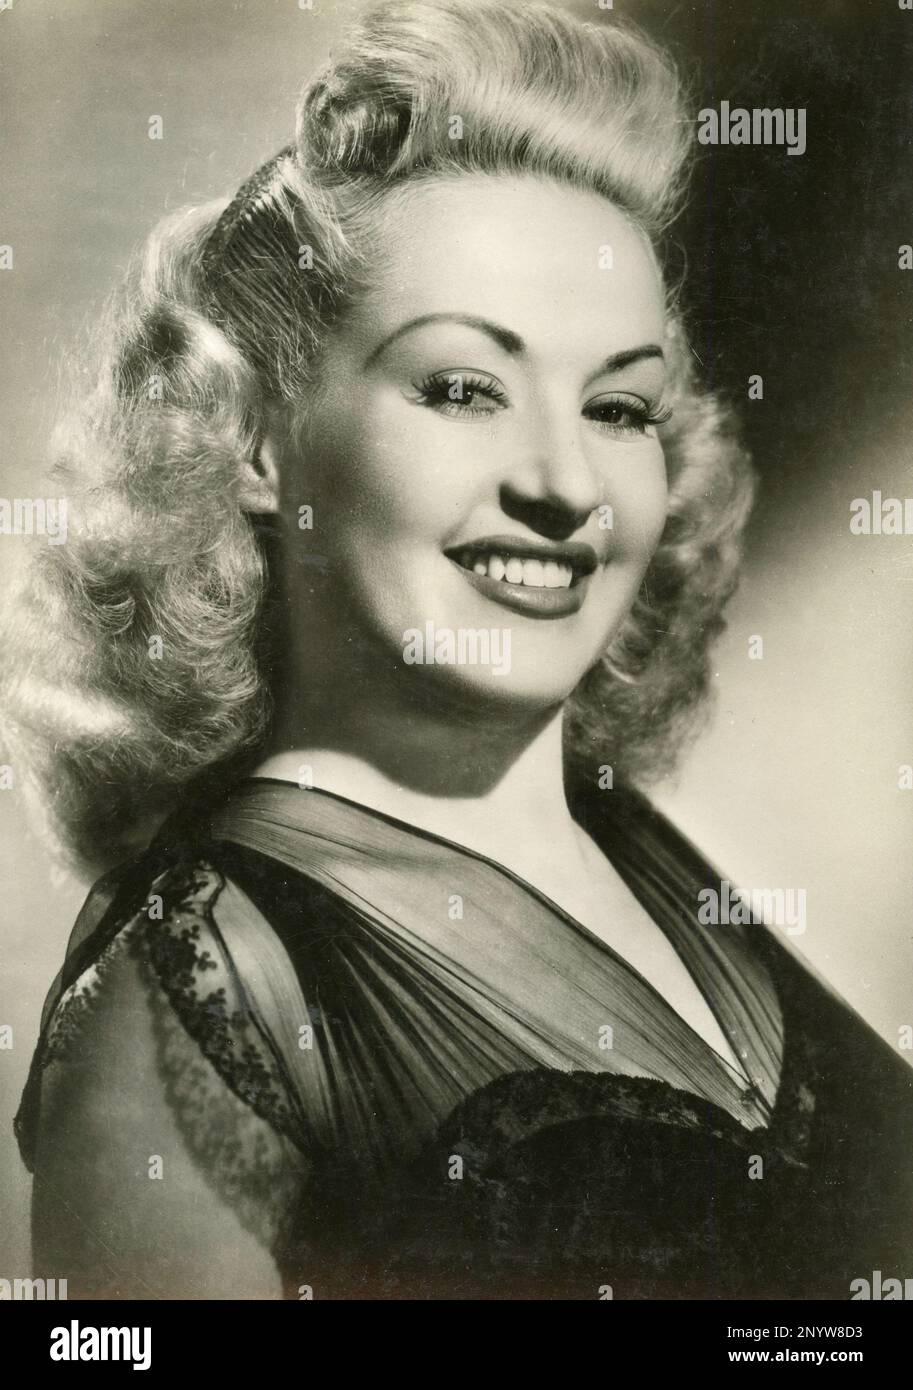 American actress Betty Grable, USA 1950s Stock Photo